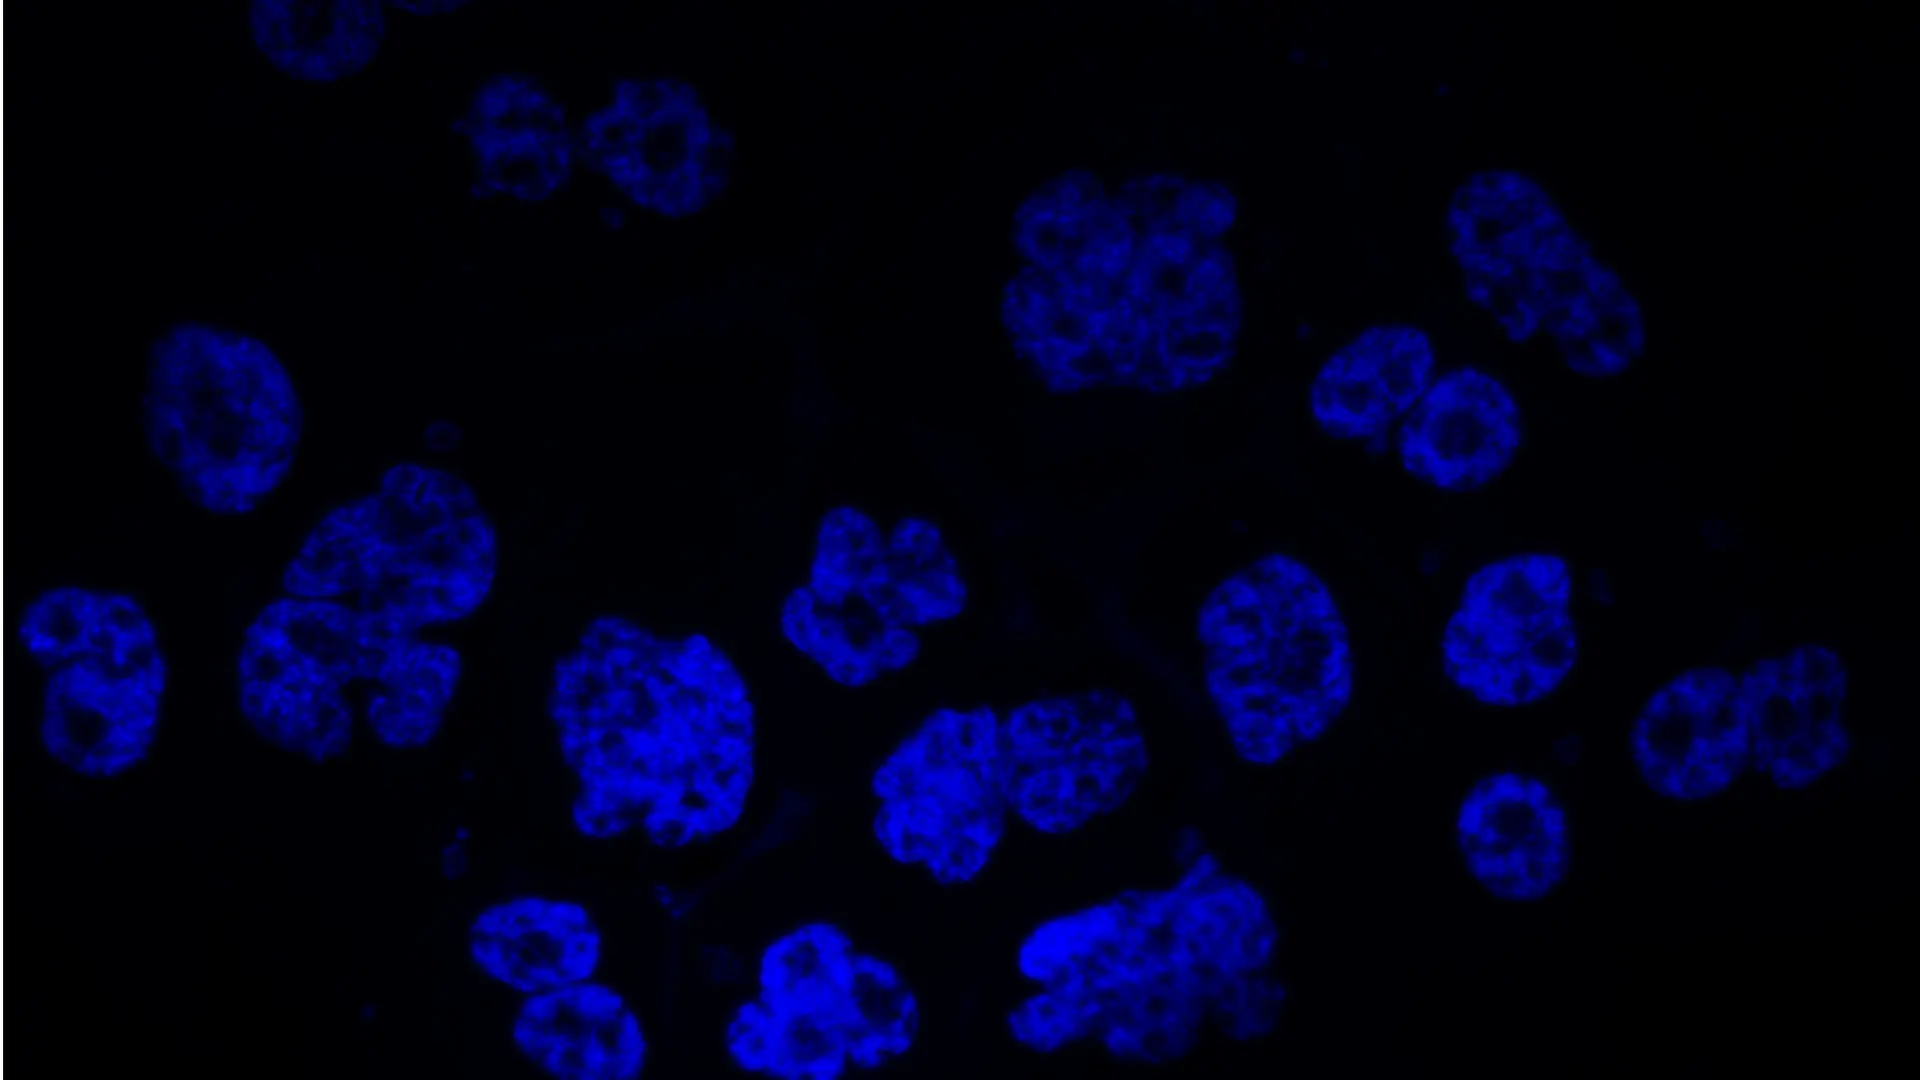 Human prostate cancer cells treated with MS21 have reduced levels of the AURKB protein and cannot successfully divide. 
